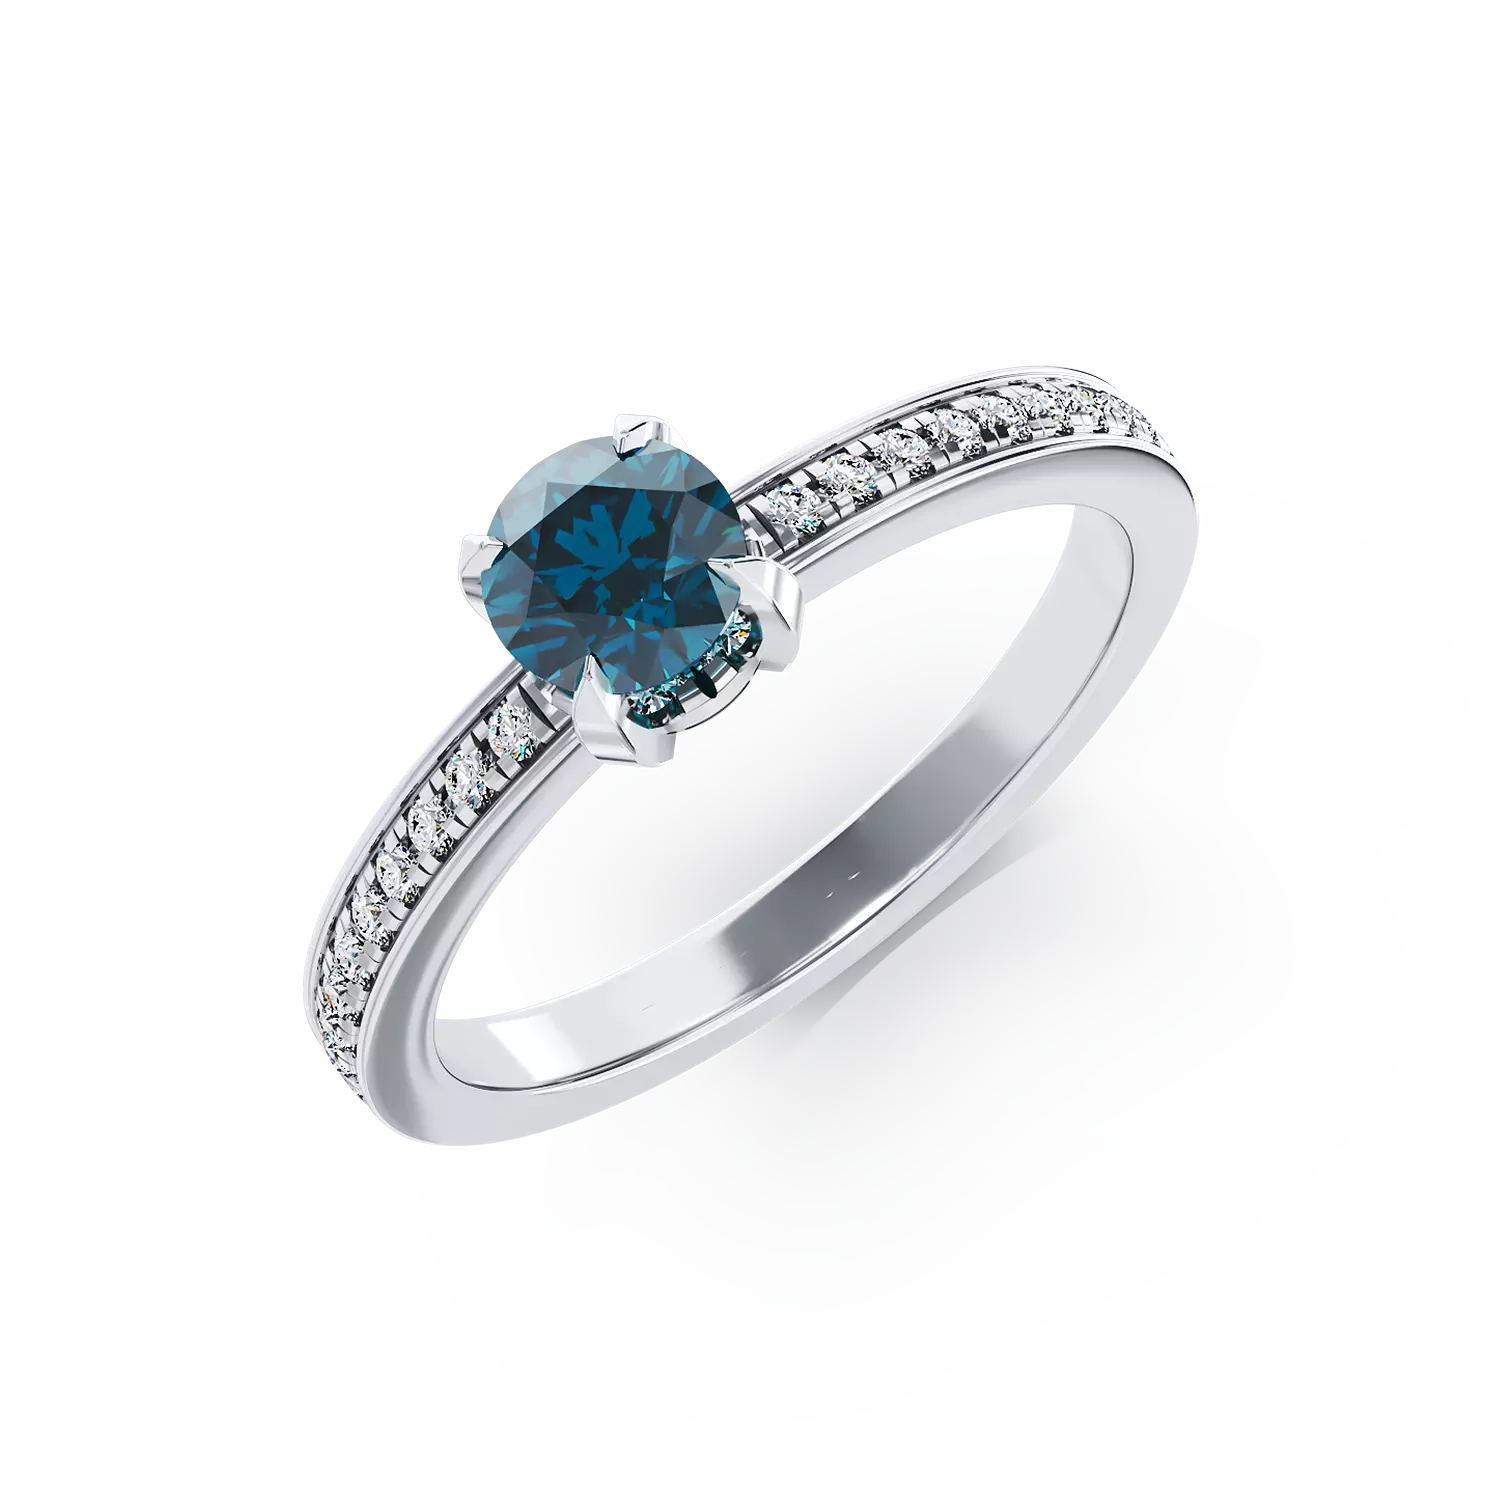 18K white gold engagement ring with 0.39ct blue diamond and 0.2ct diamonds